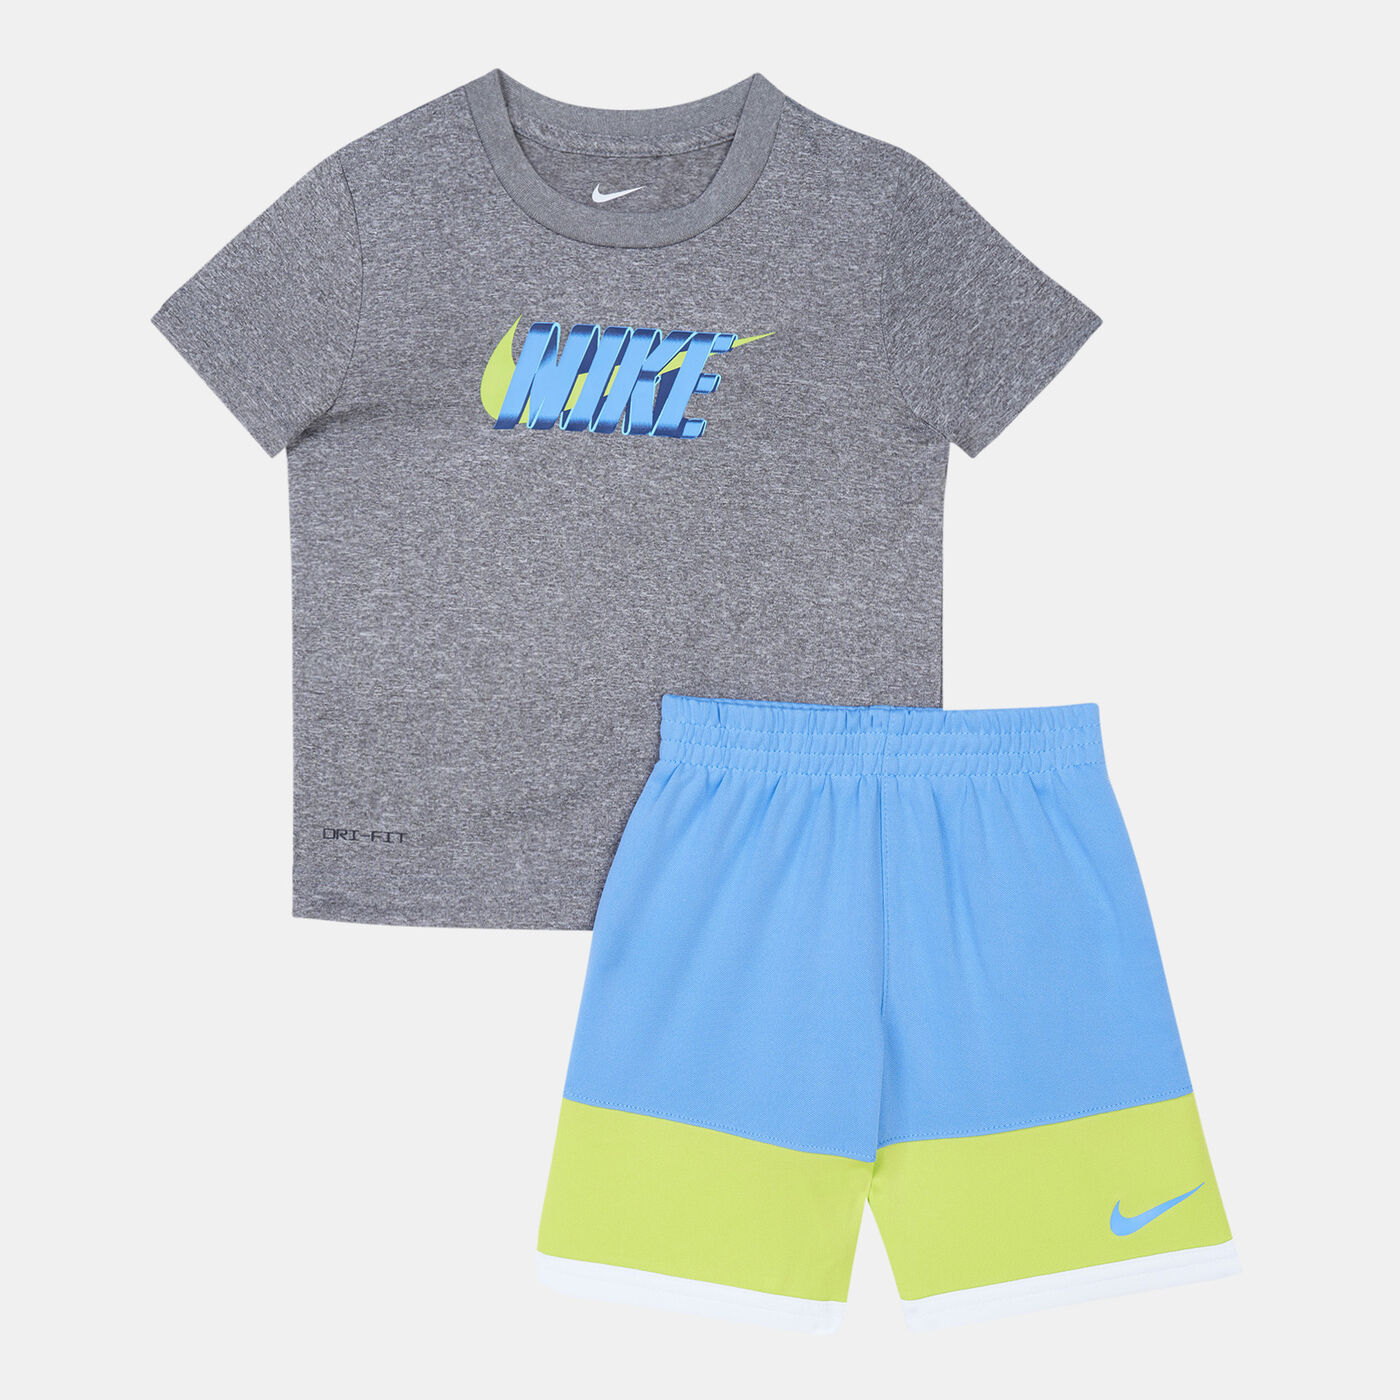 Kids' Dri-FIT T-Shirt and Shorts Set (Baby and Toddler)